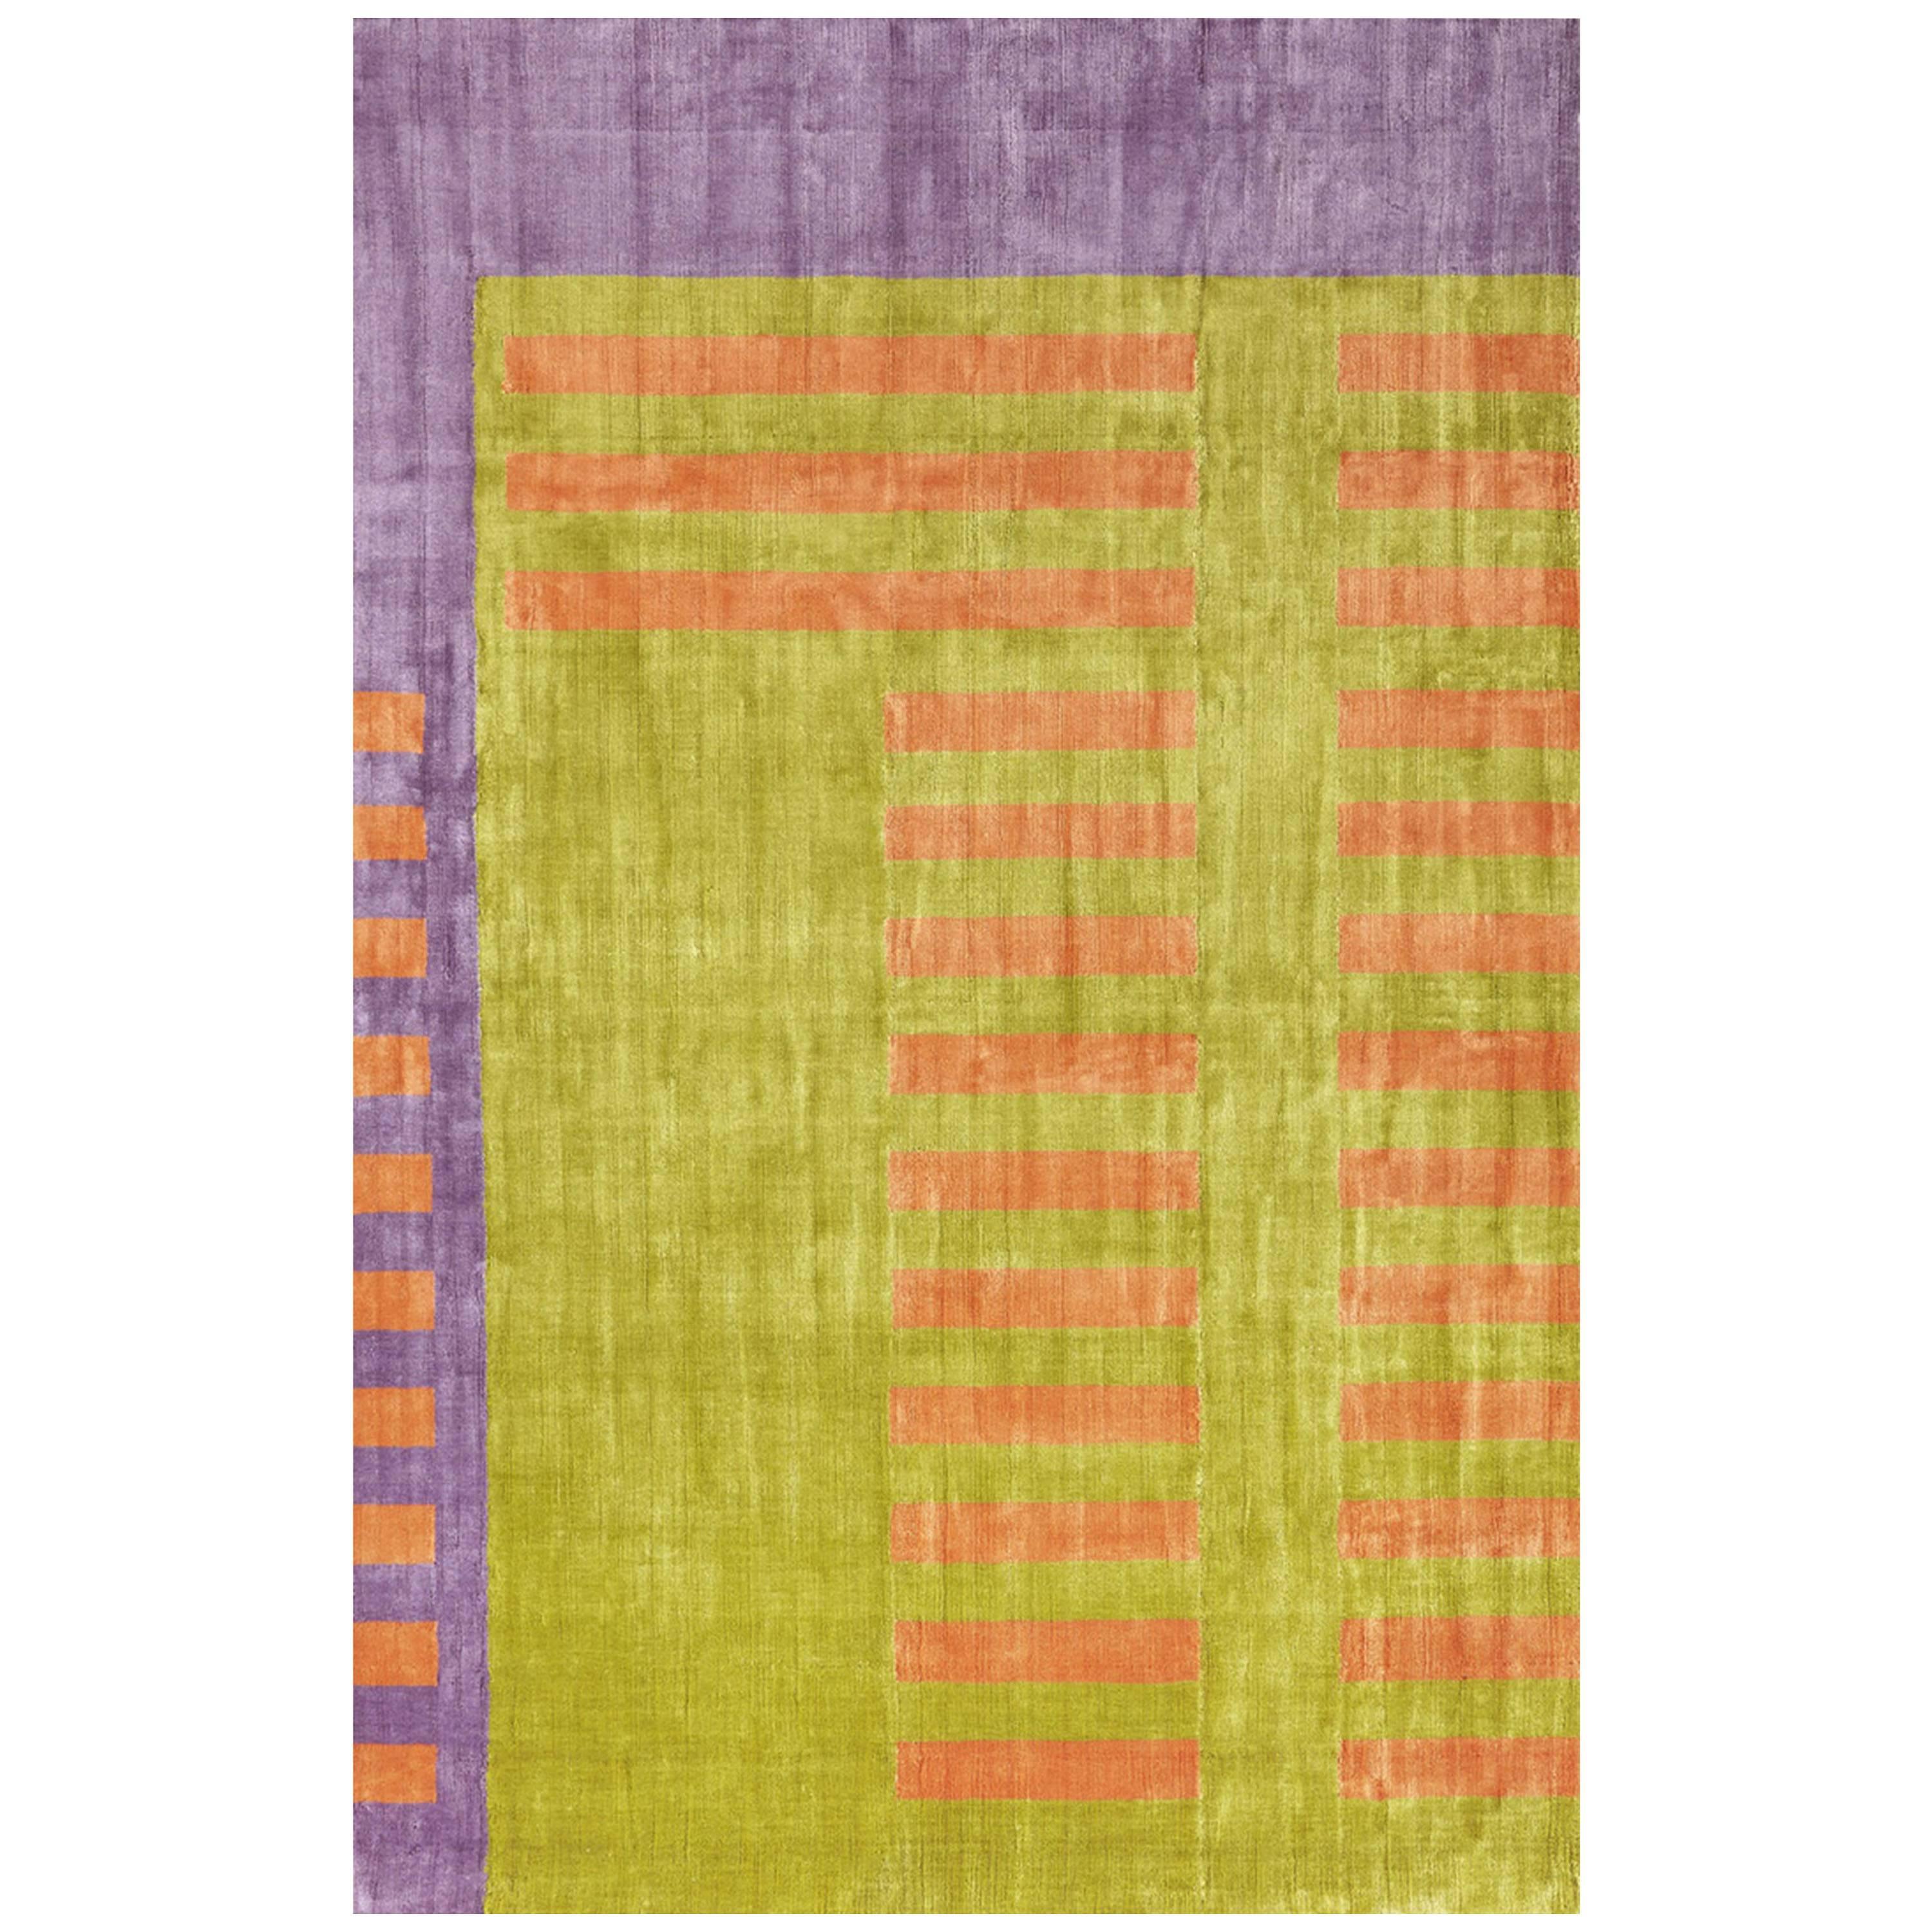 "Fire" Modern Loom-Knotted Natural Silk Rug Josef Albers inspired 2014 For Sale